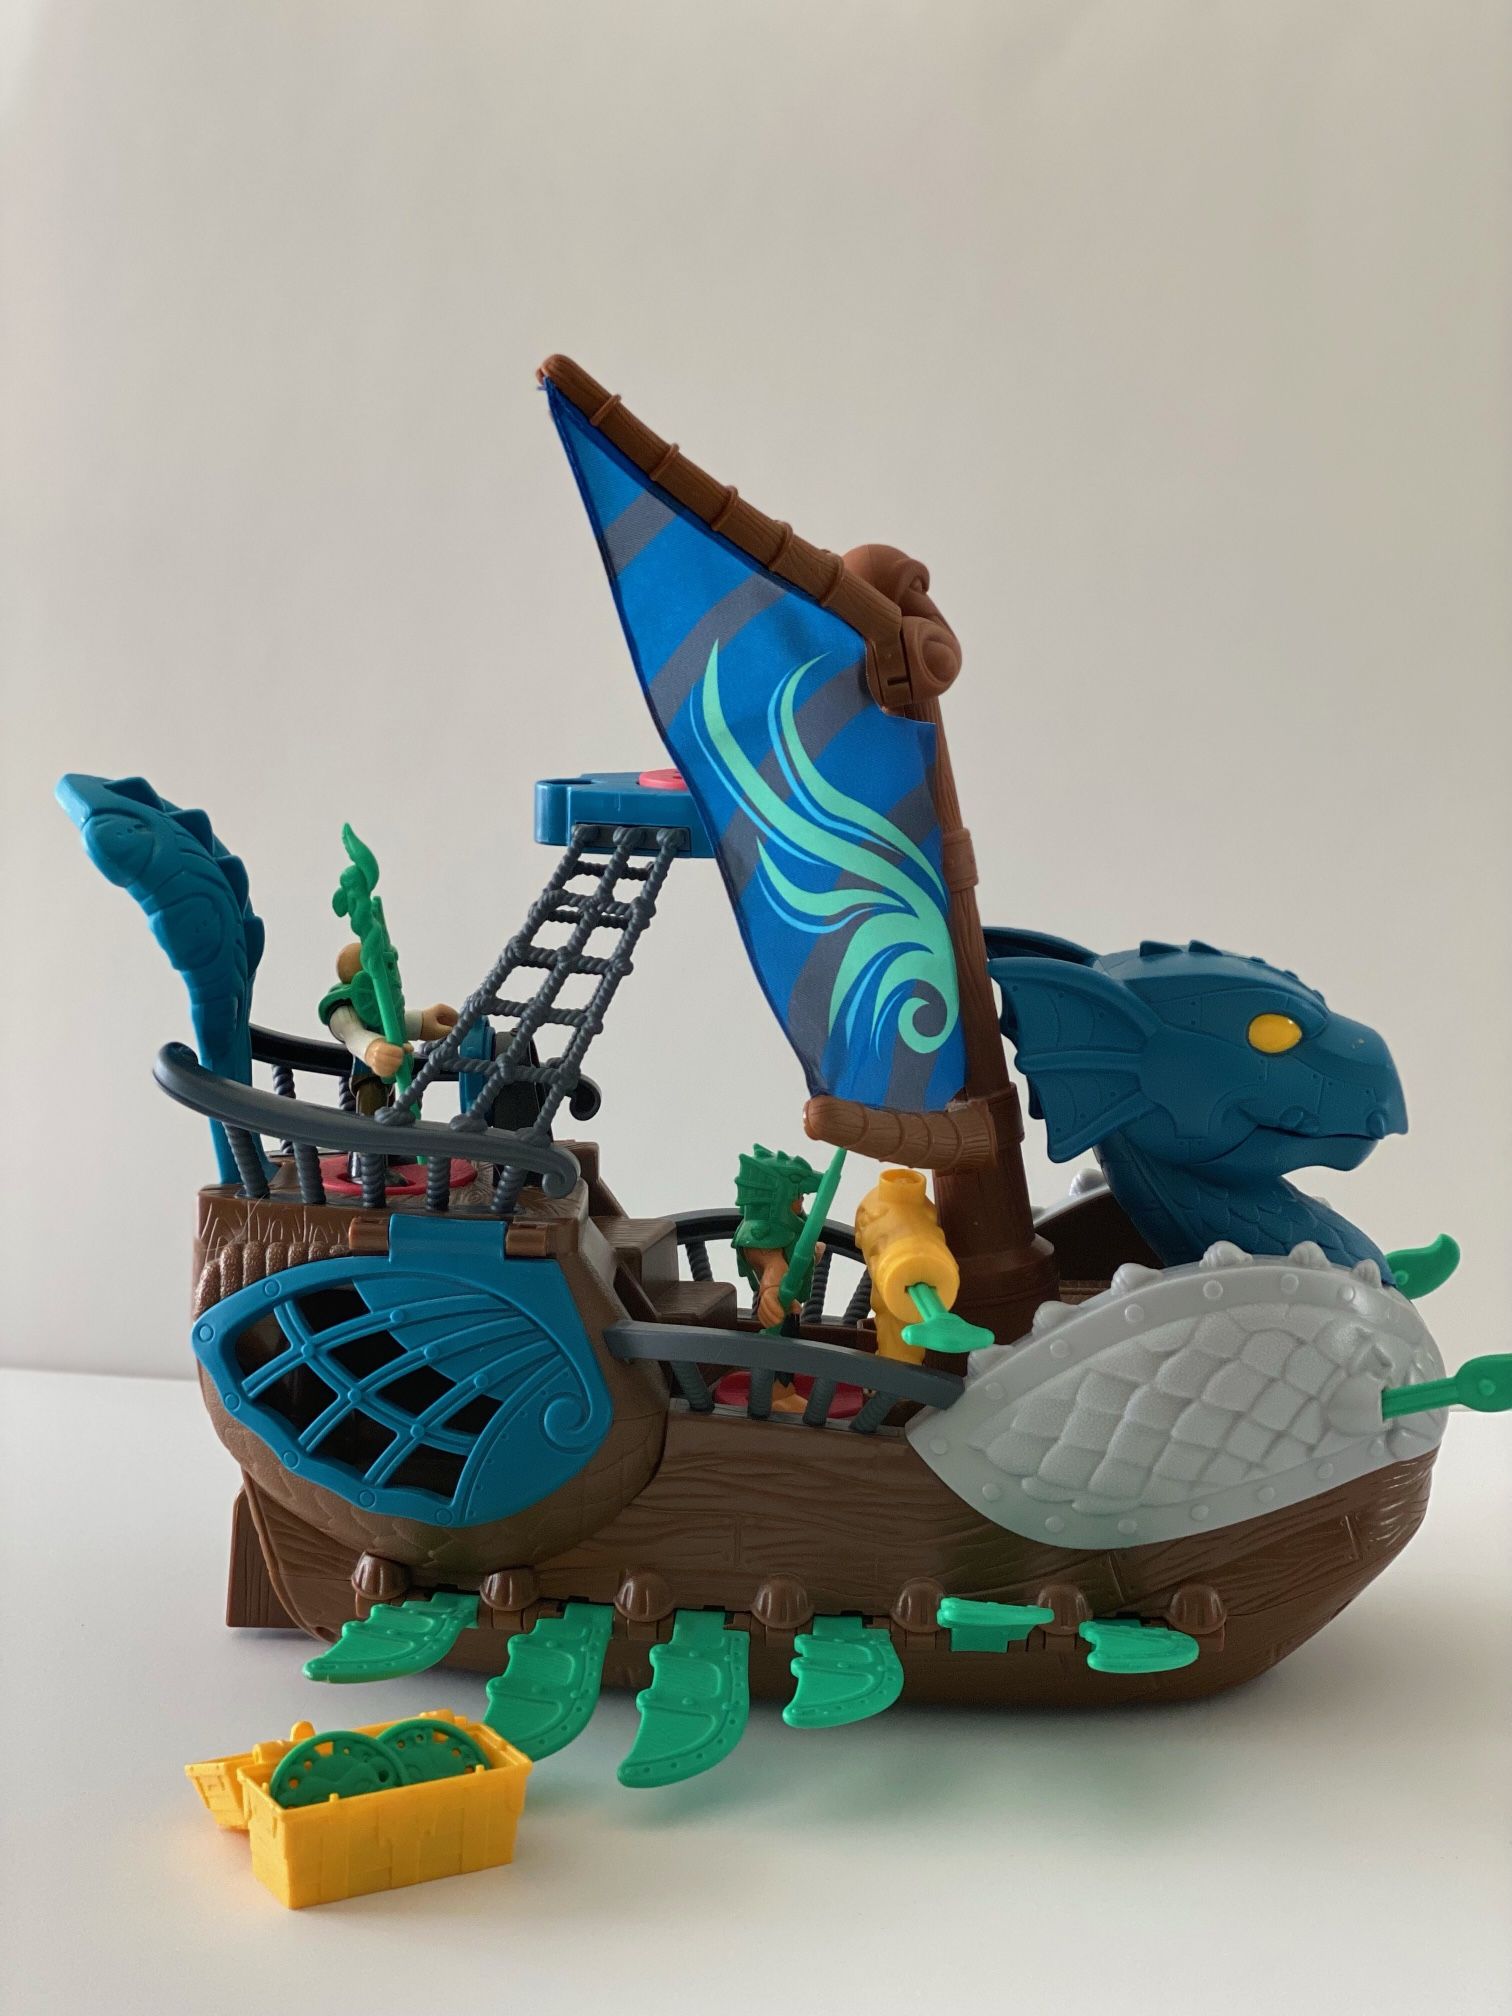 Imaginext Serpent Pirate Ship by Fisher Price